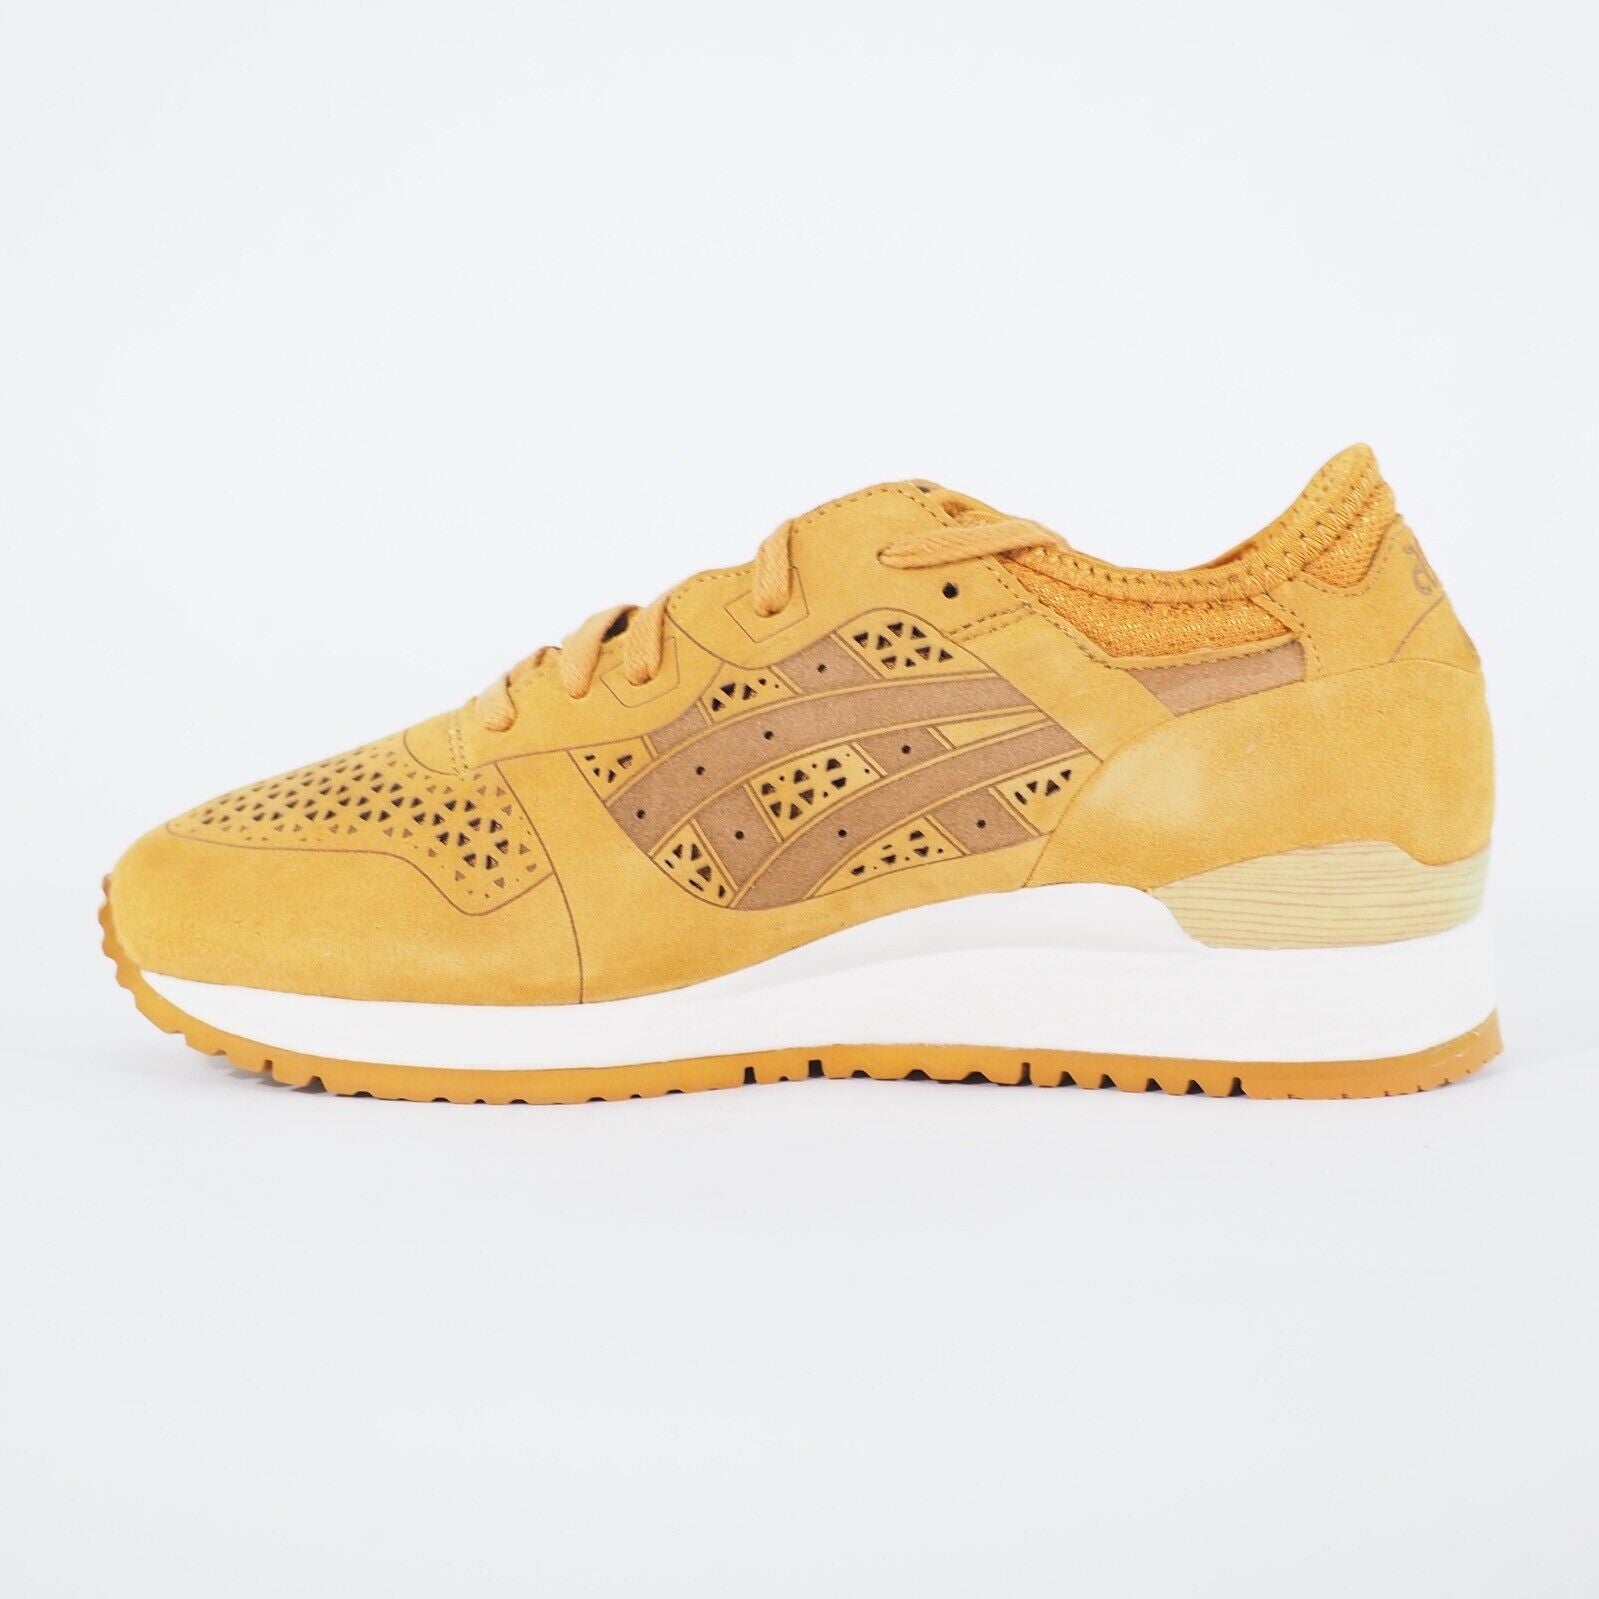 Junior Asics Gel-Lyte 3 LC H5E3L Tan Lace Up Casual Walking Sports Trainers